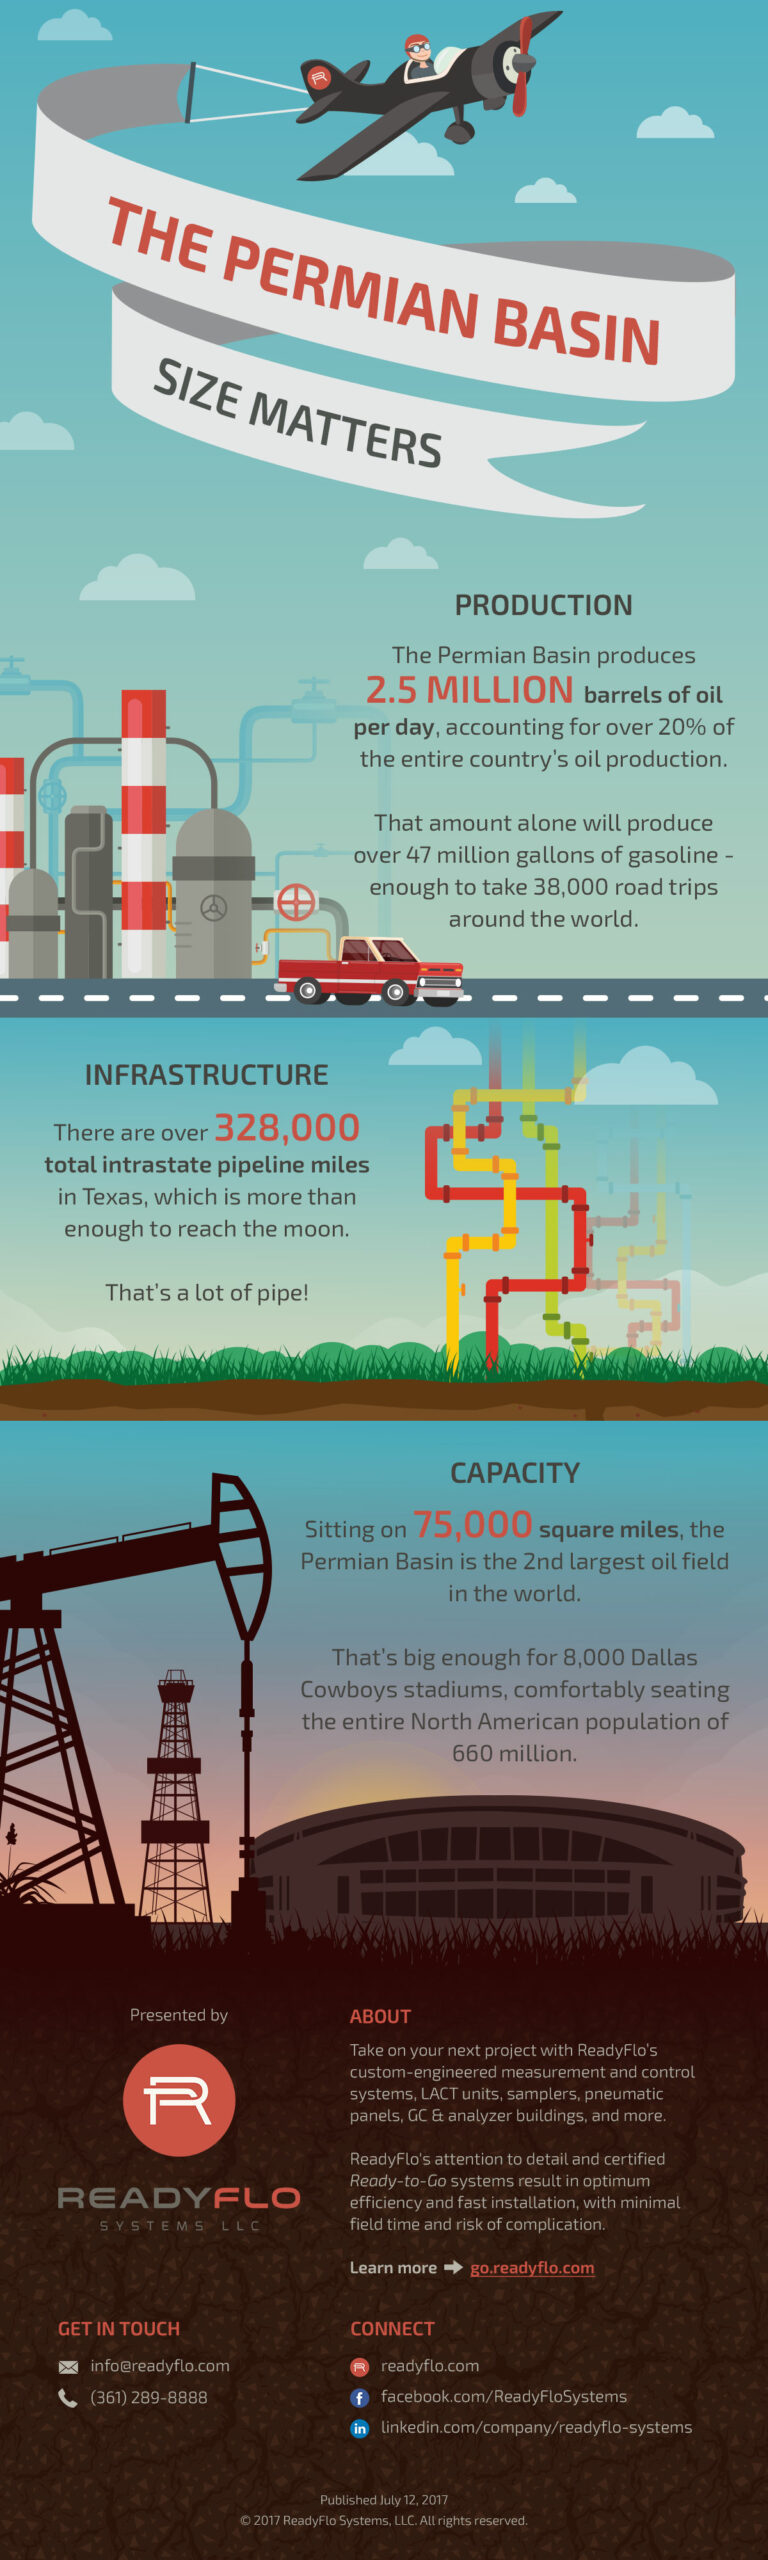 Permian Basin Infographic